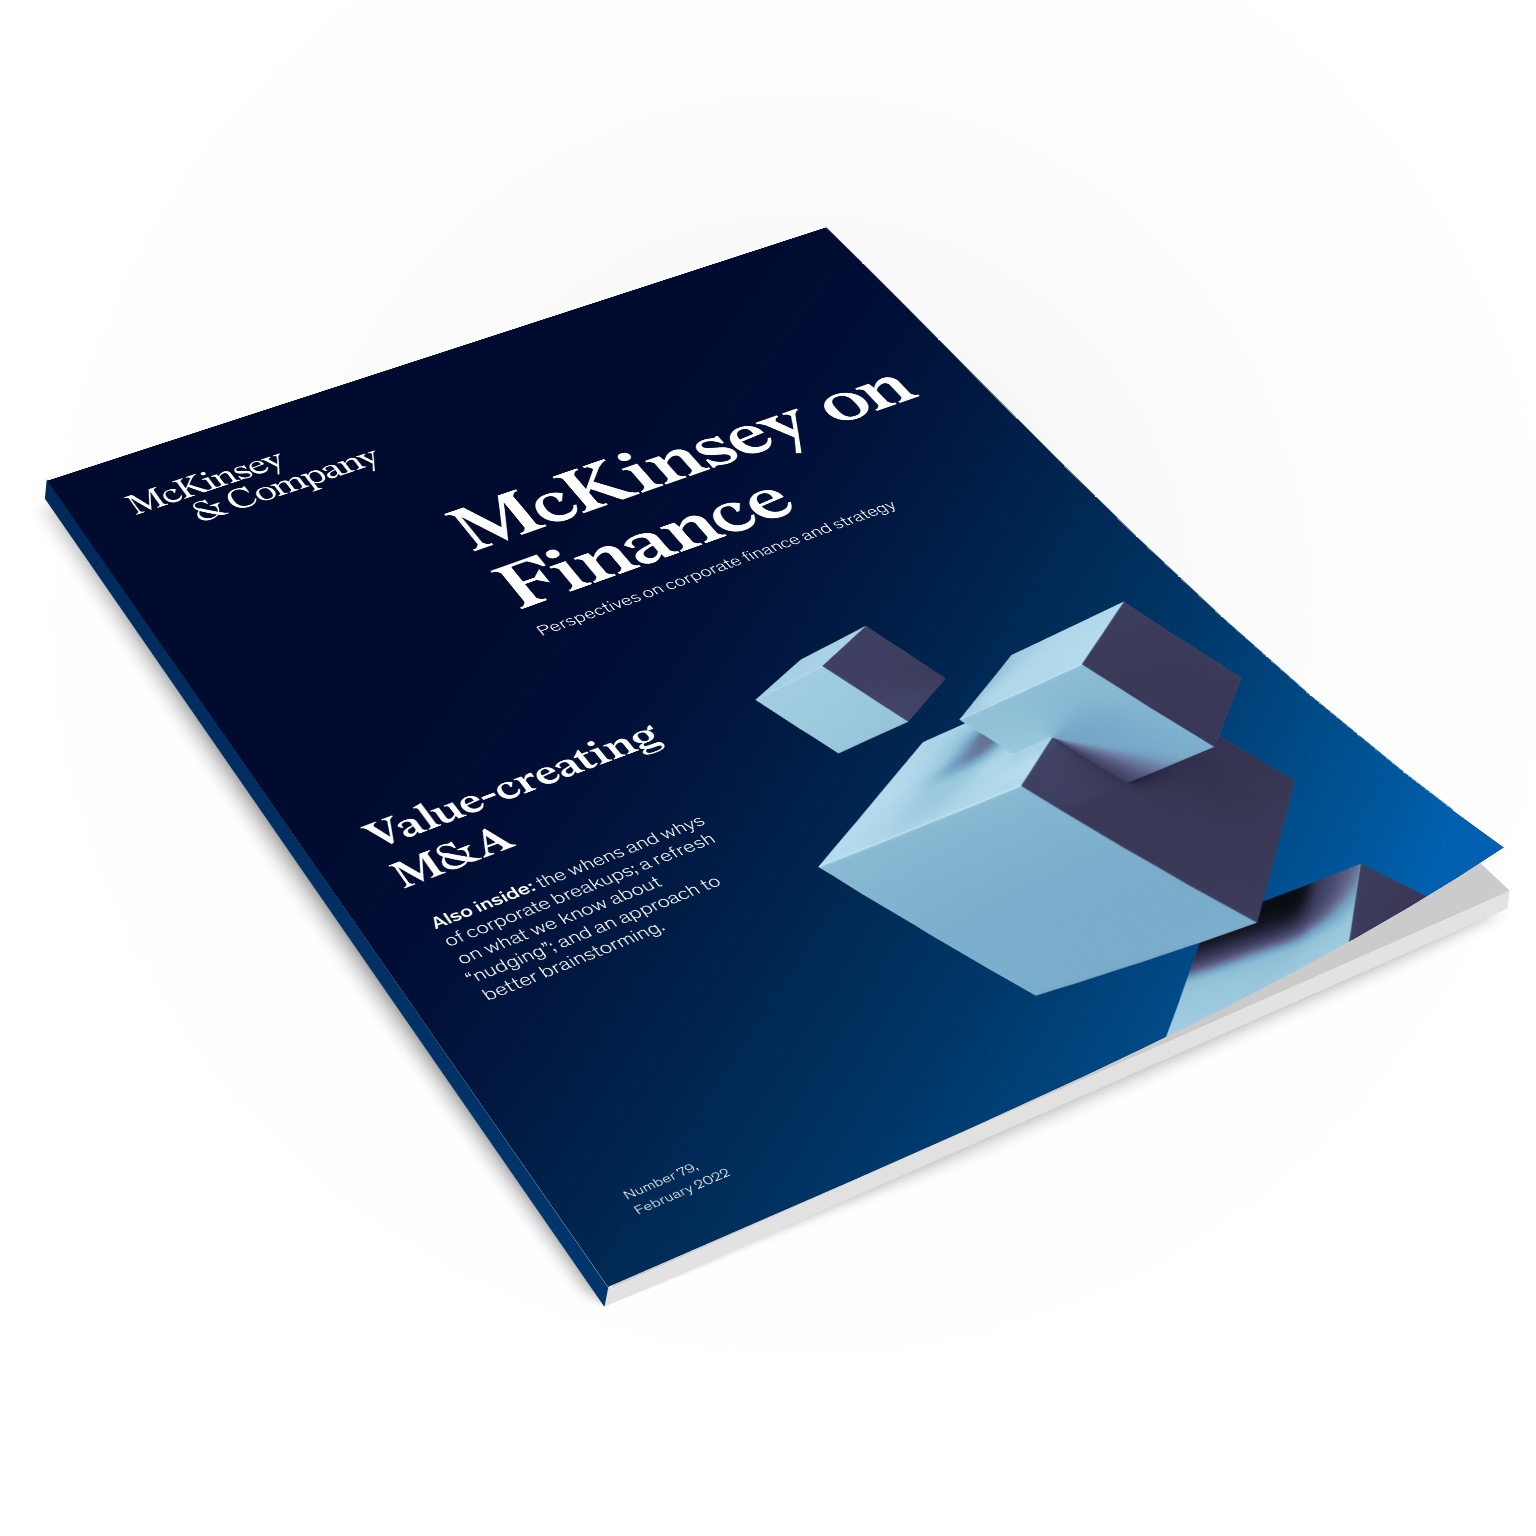 McKinsey on Finance, Number 79 | Strategy & Corporate Finance 